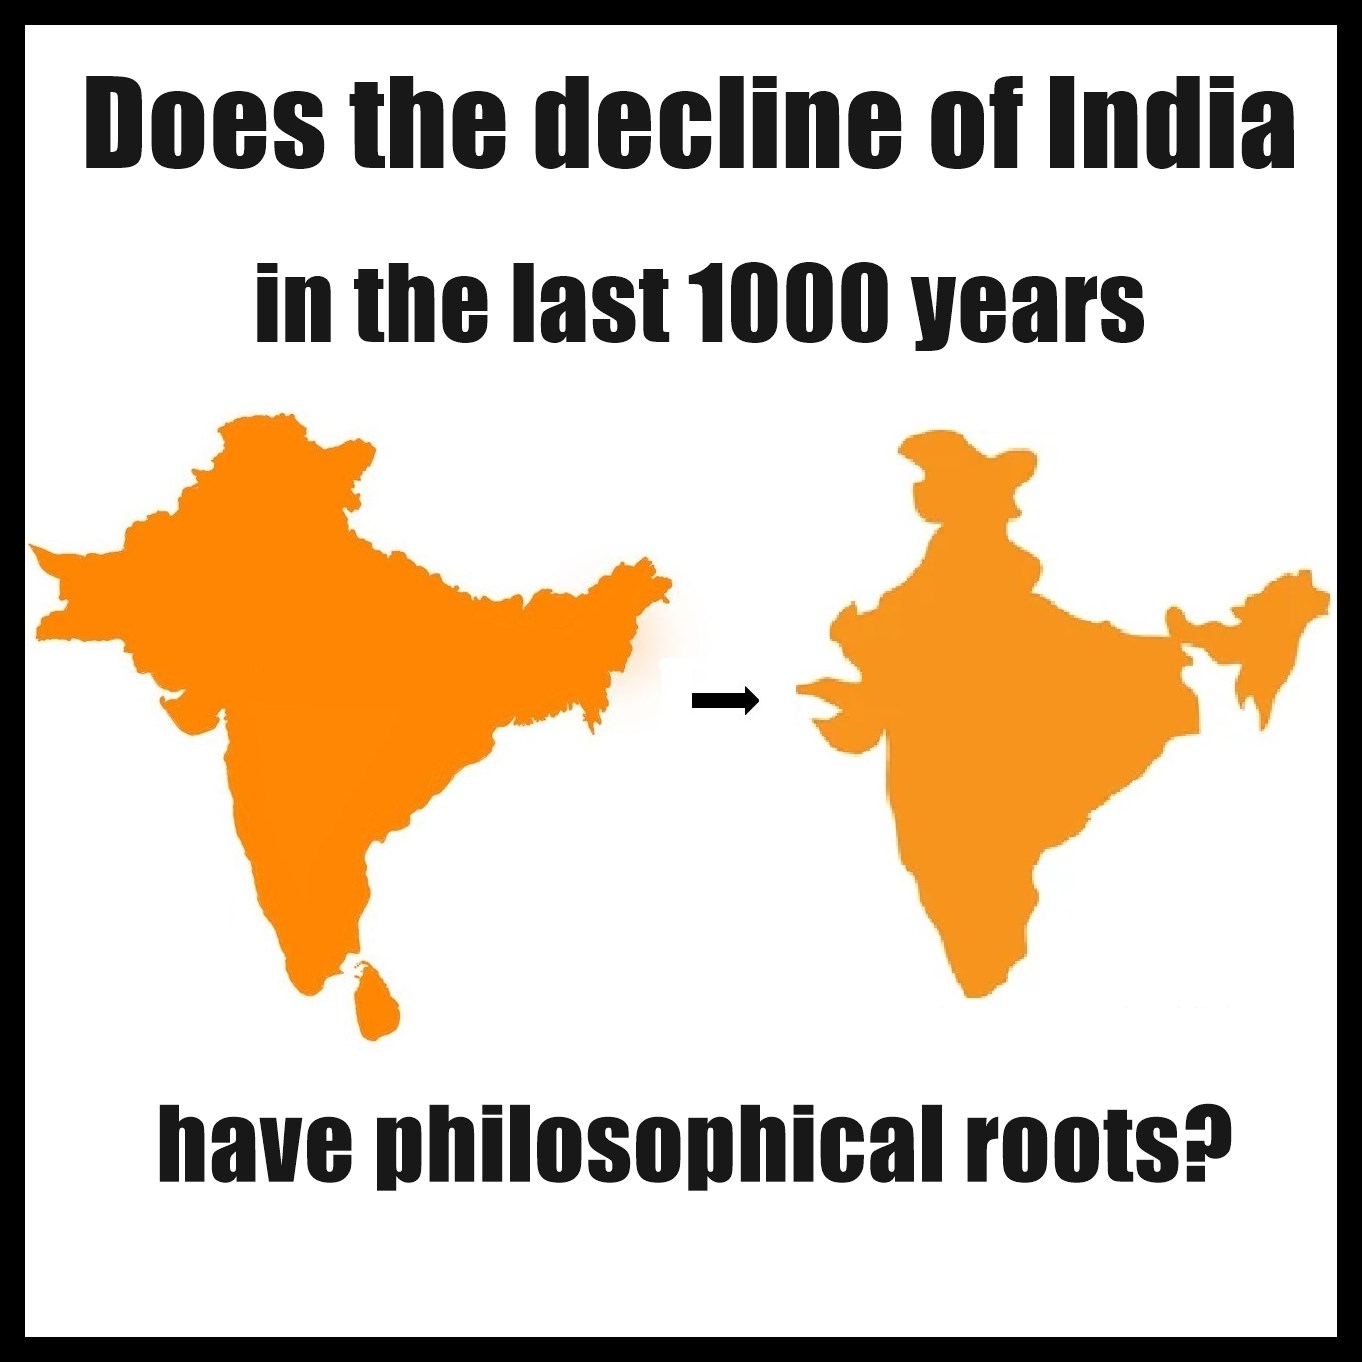 India’s Decline: Philosophical Roots?